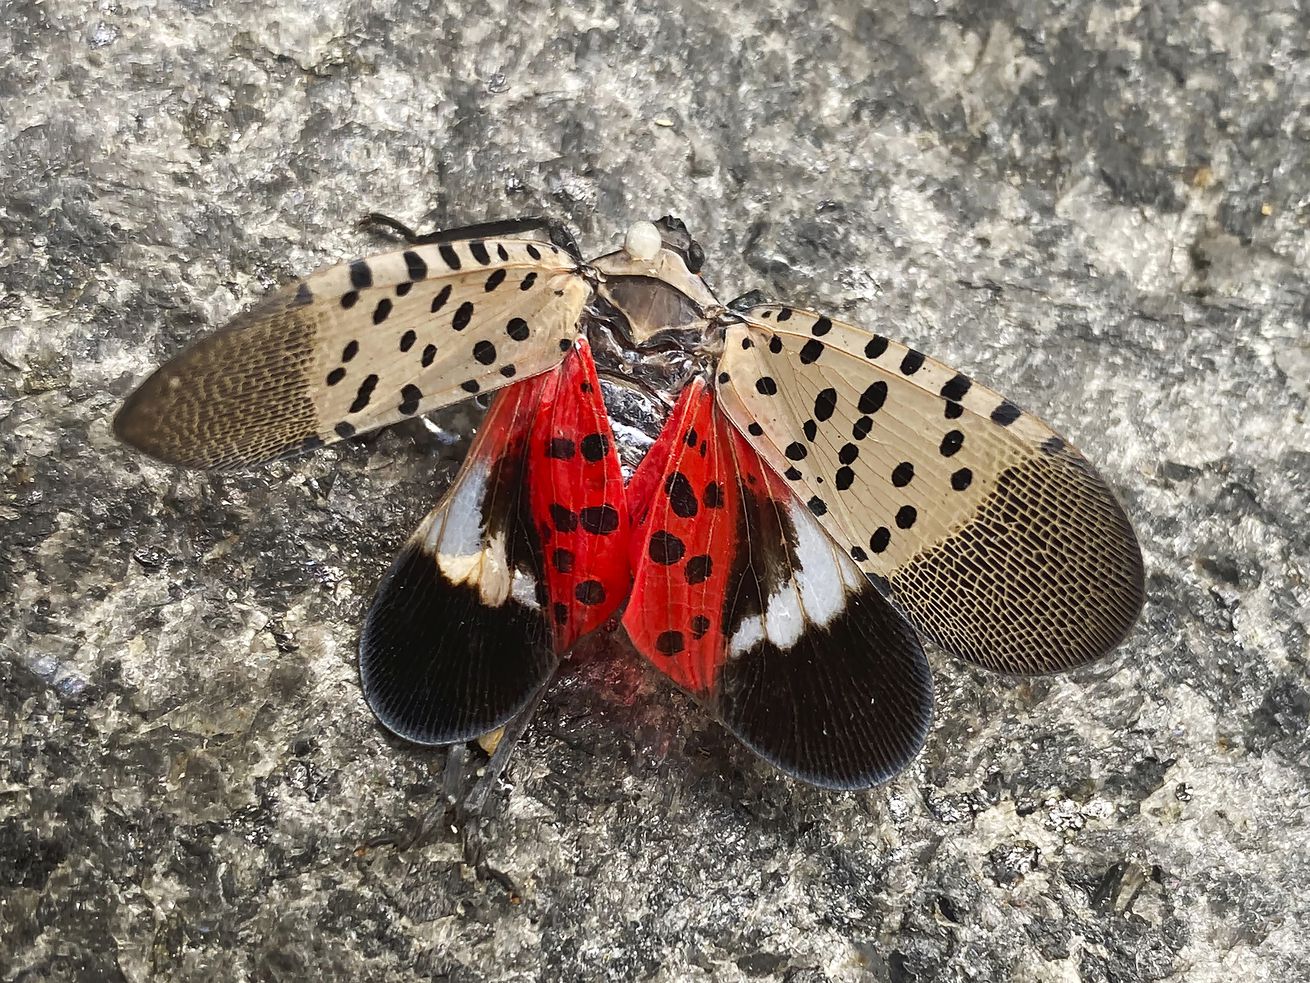 Blowtorching spotted lanternflies is, in fact, a bad idea